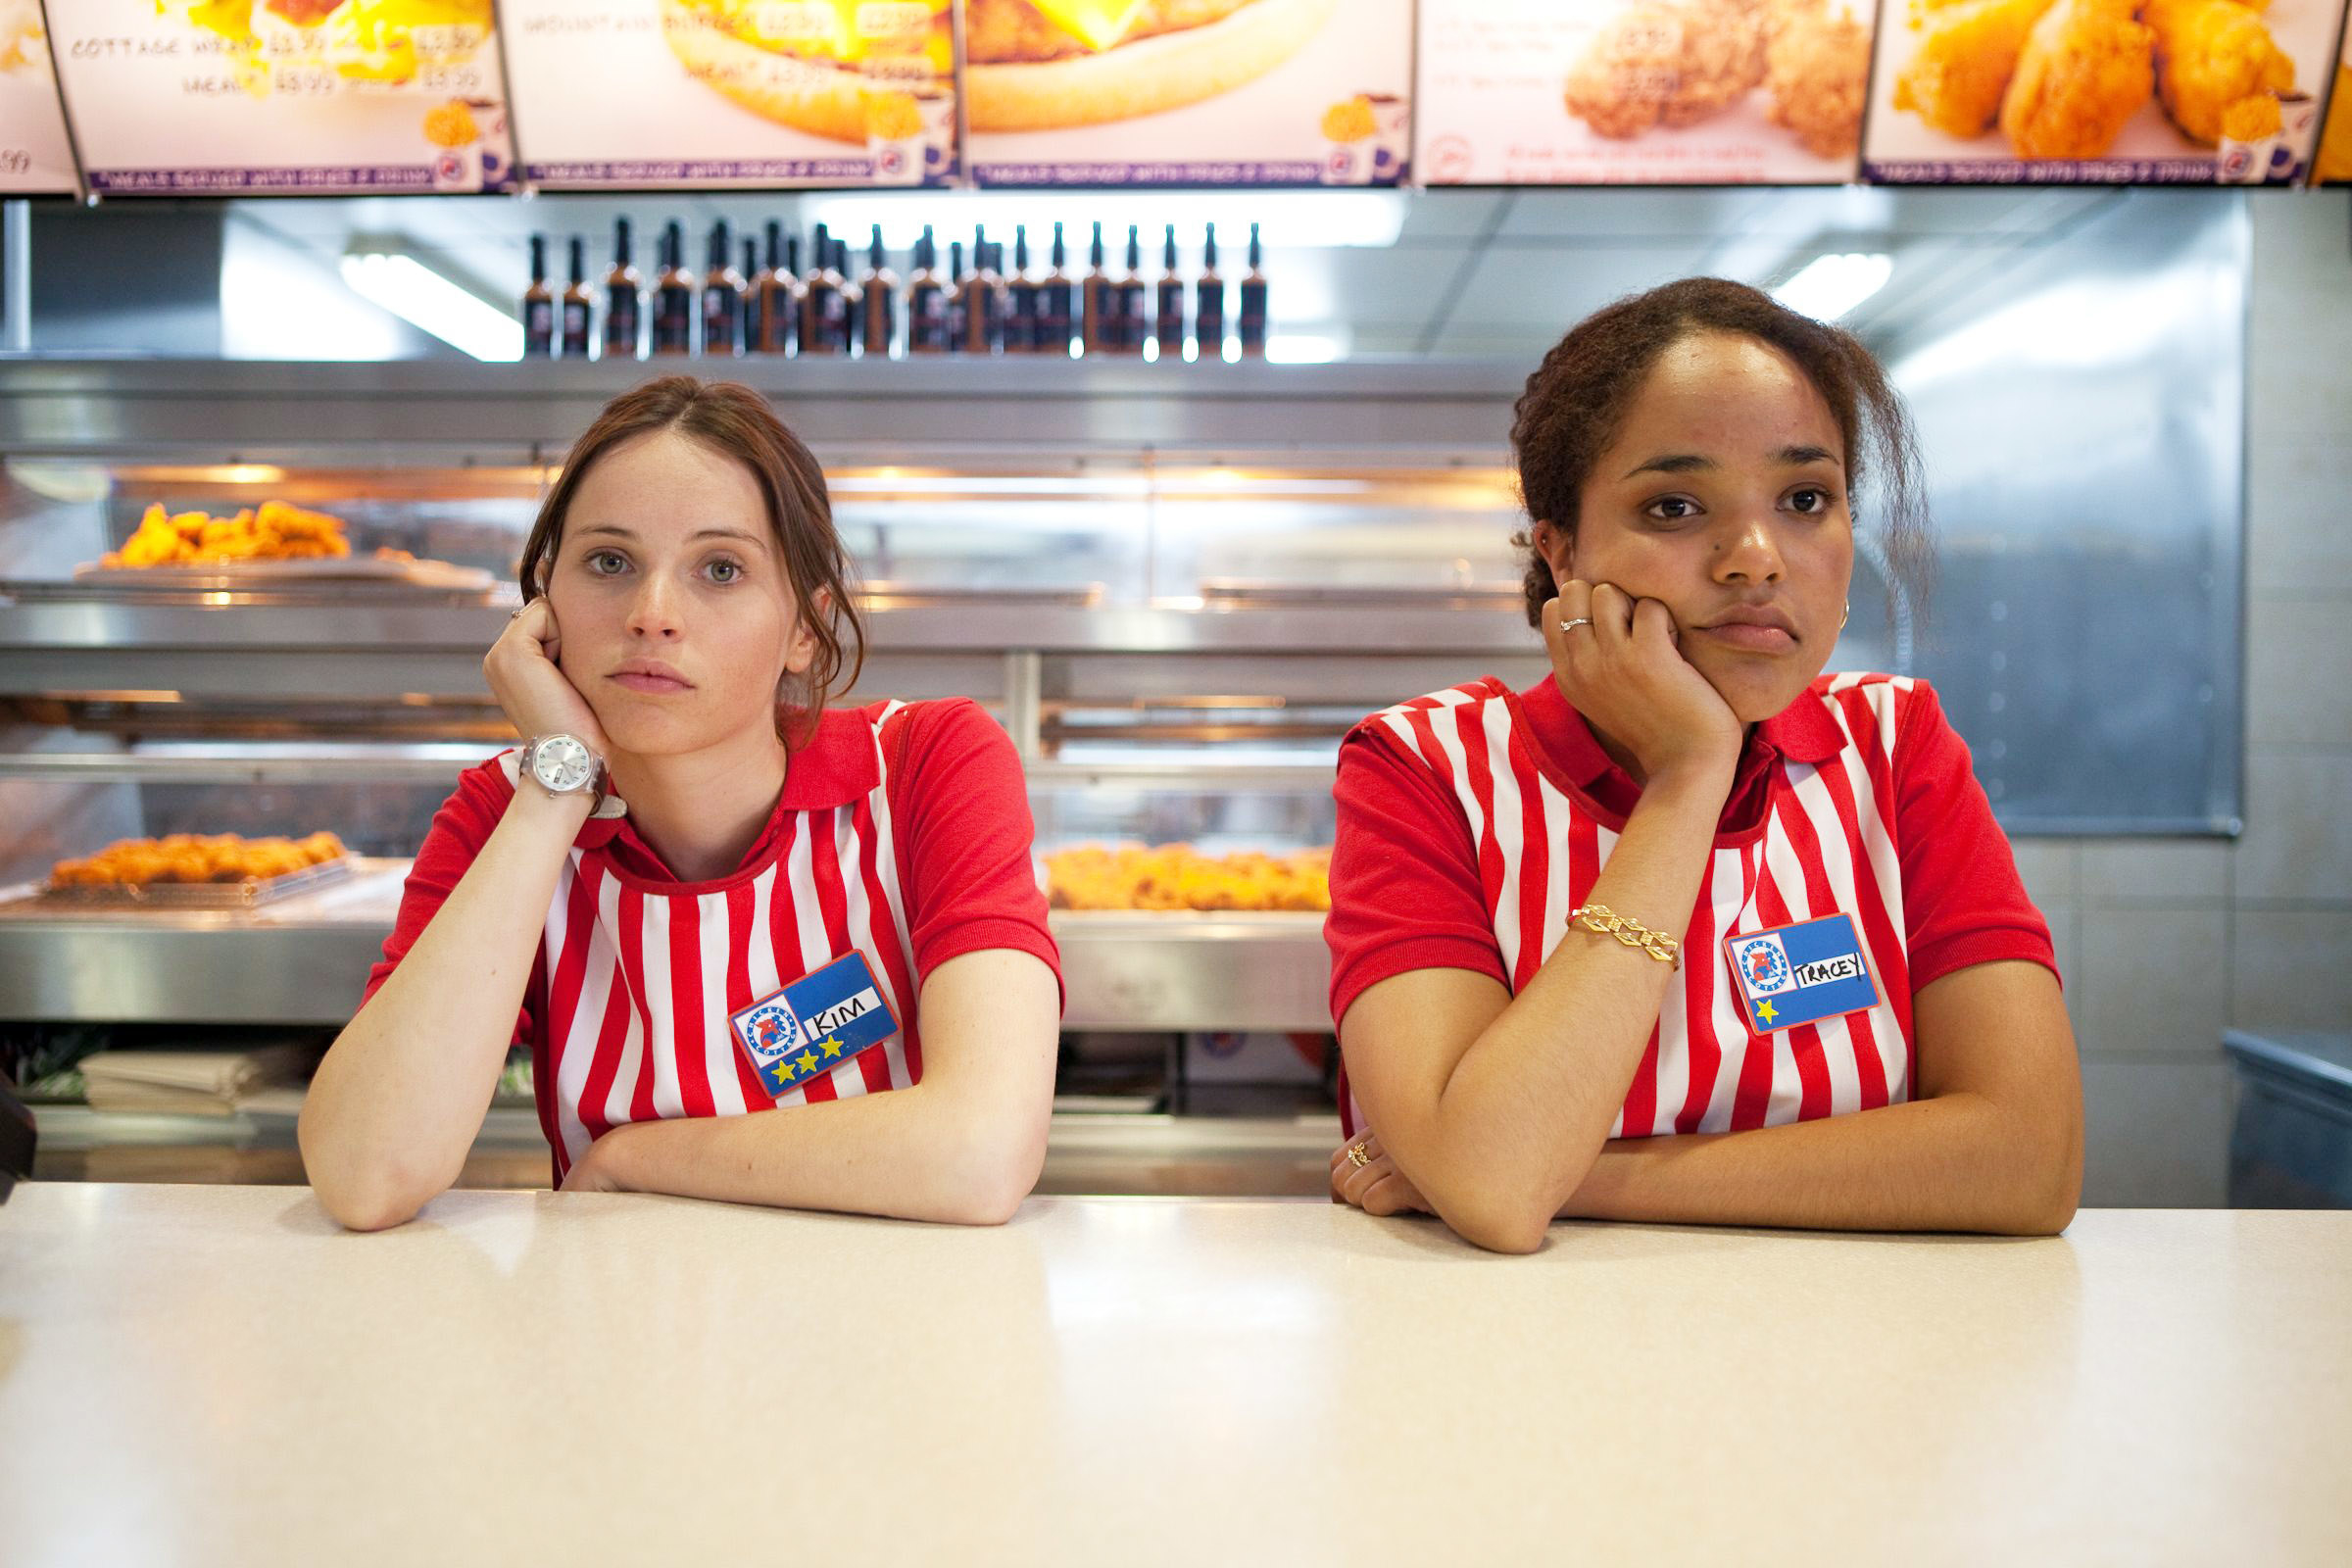 Two fast-food workers behind a counter looking glum